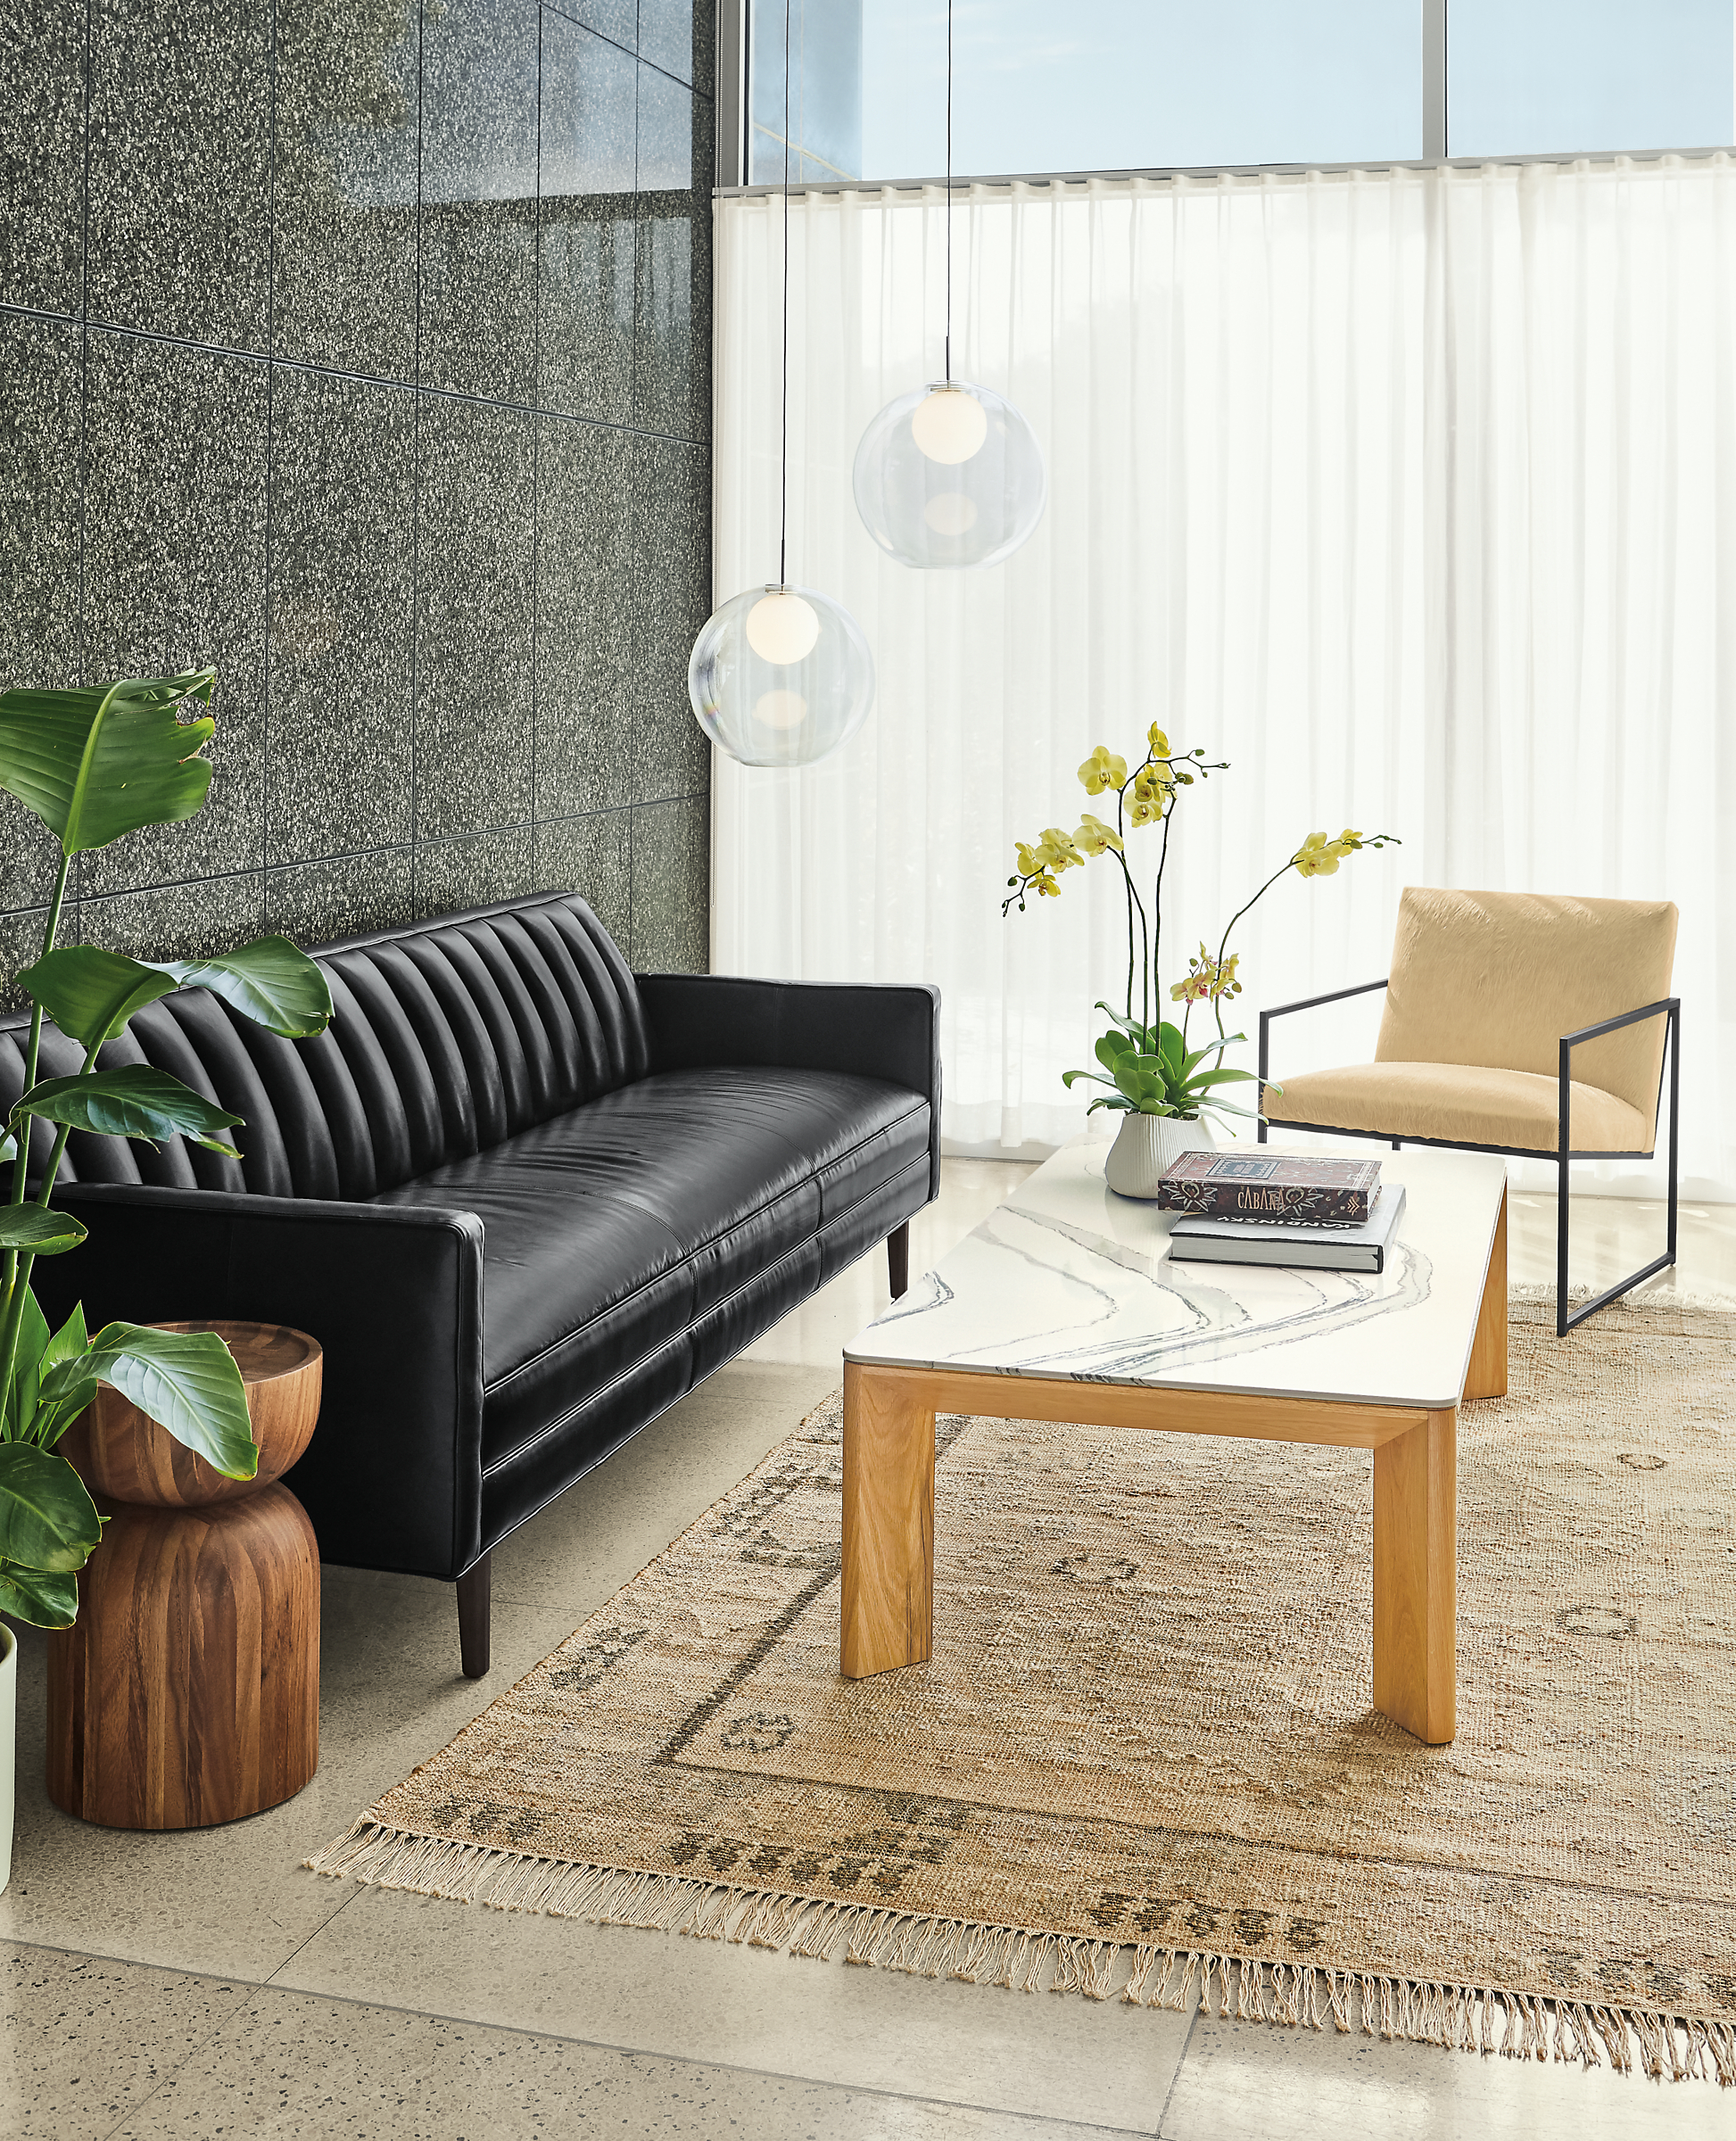 Detail of Goodwin sofa in Vento Black leather with Pren coffee table.